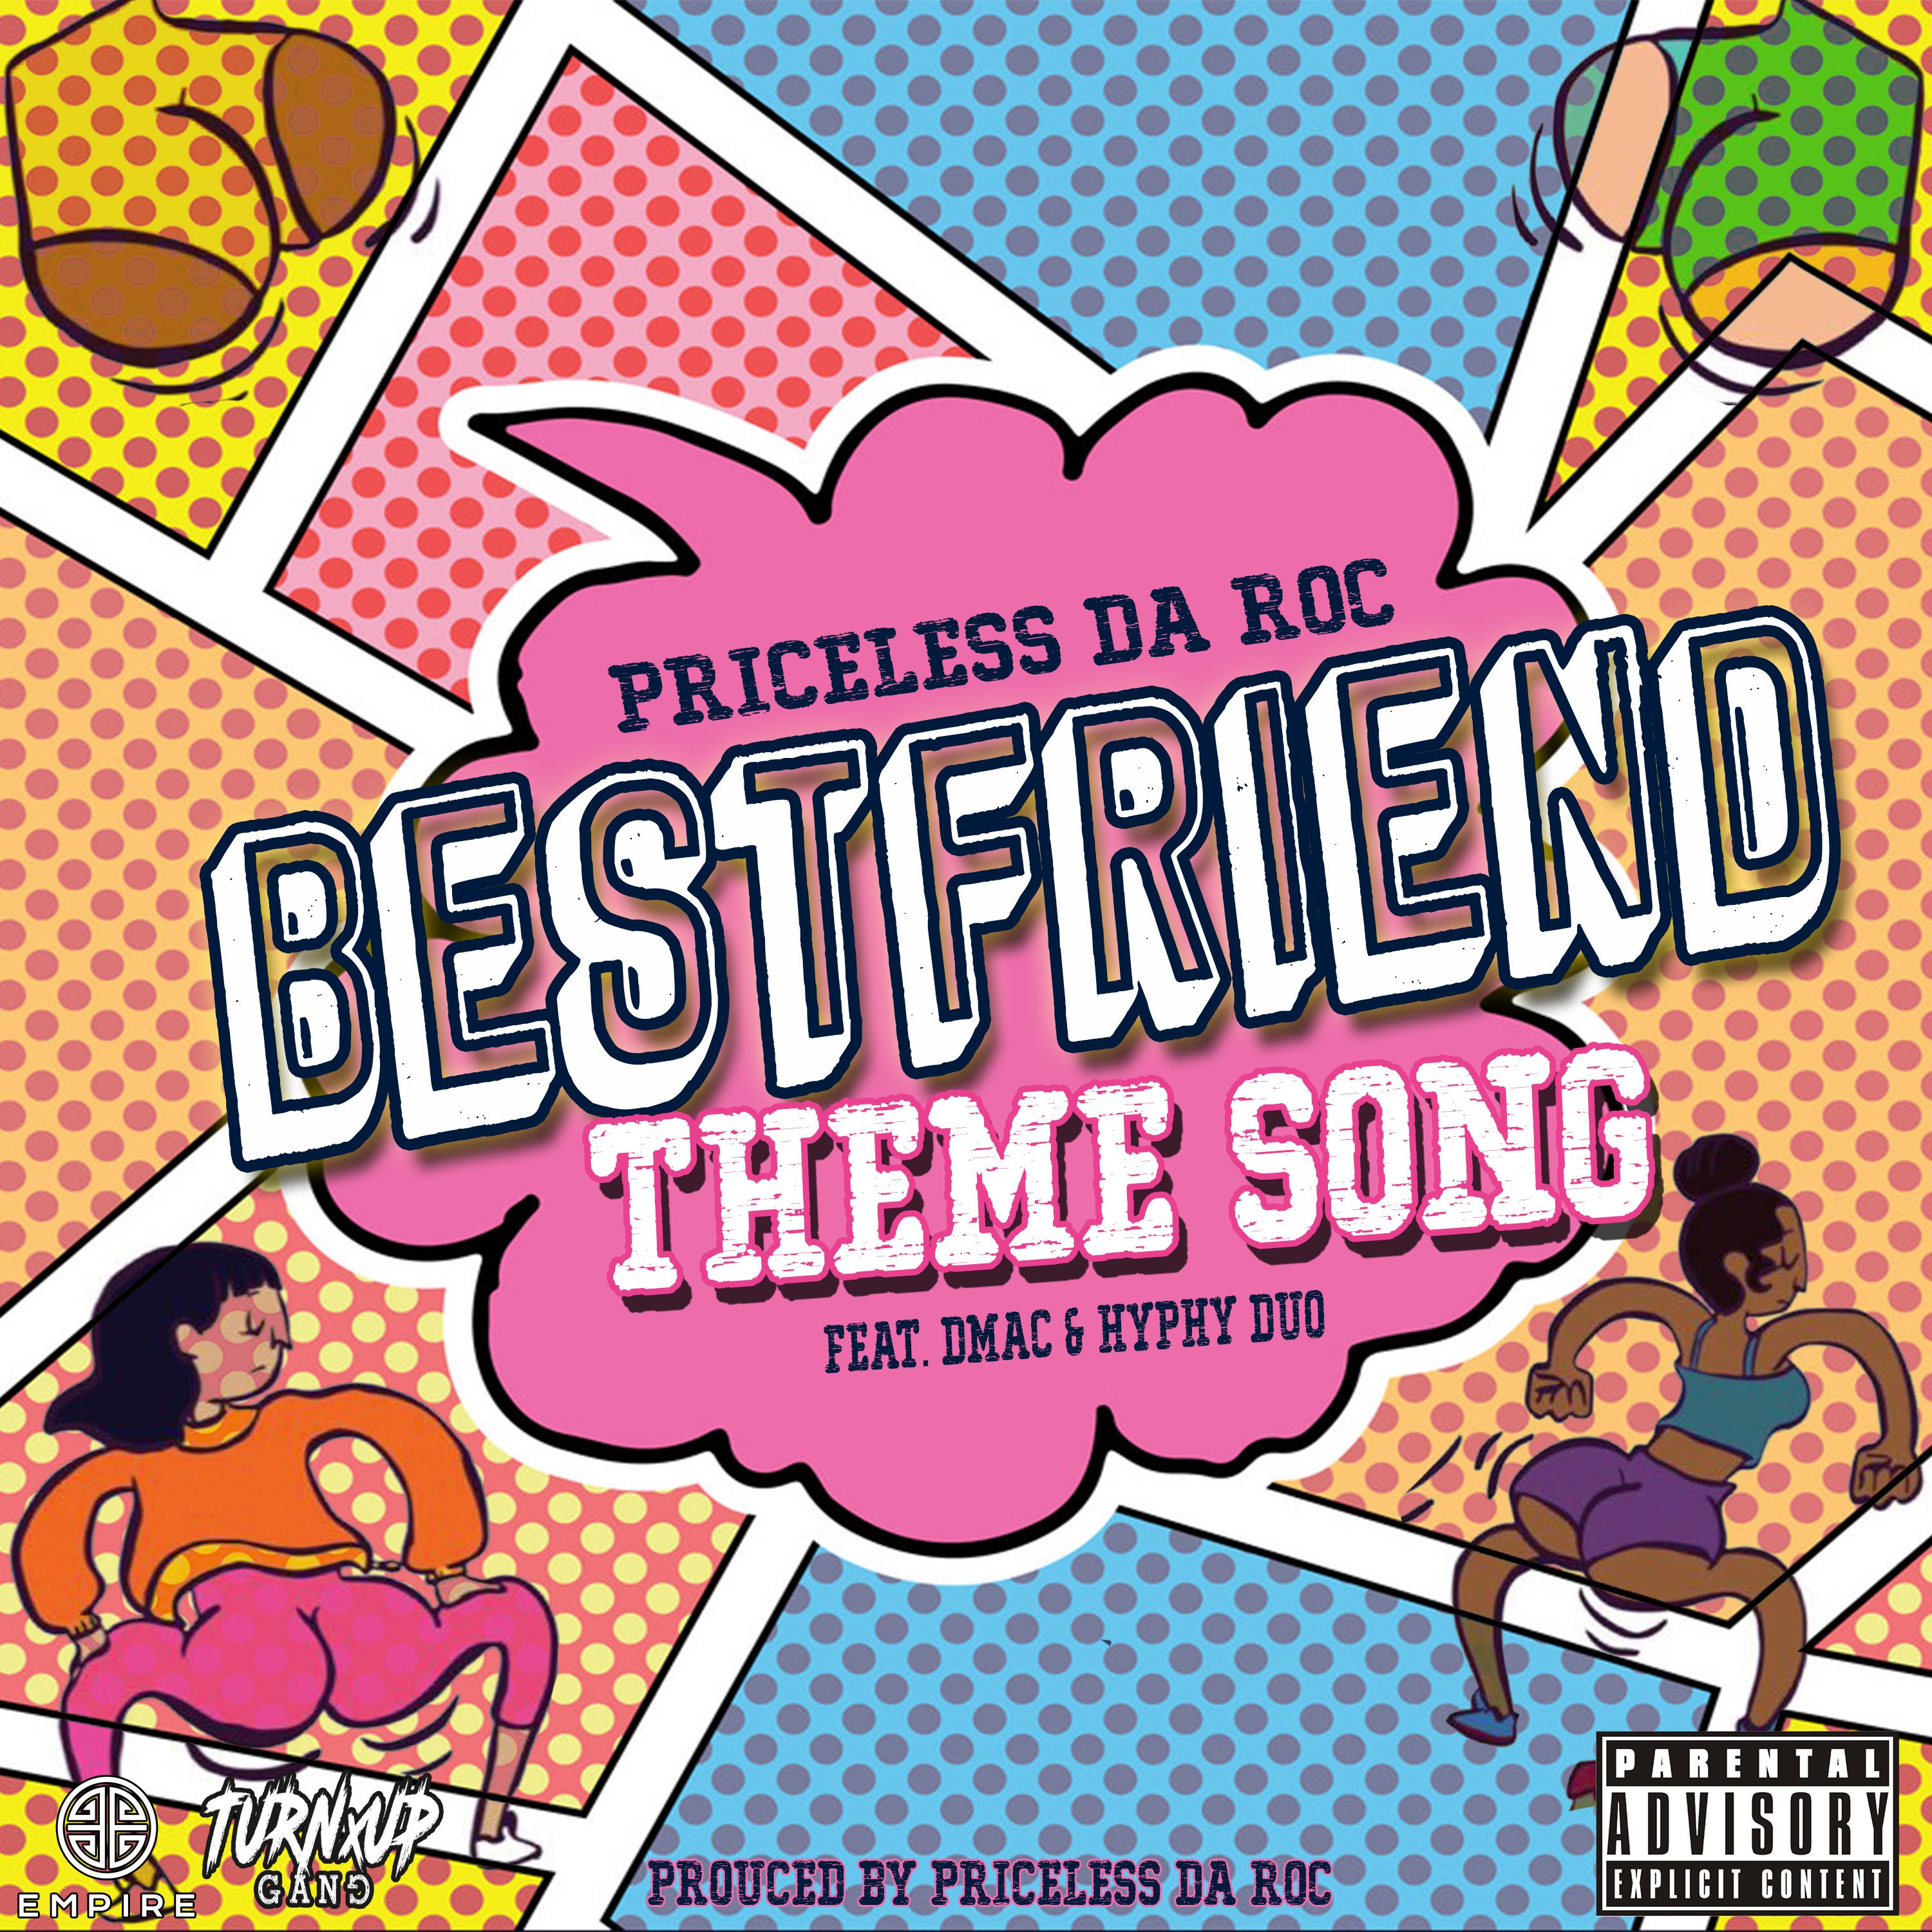 The Bestfriend Theme Song (feat. Dmac & Hyphy Duo)